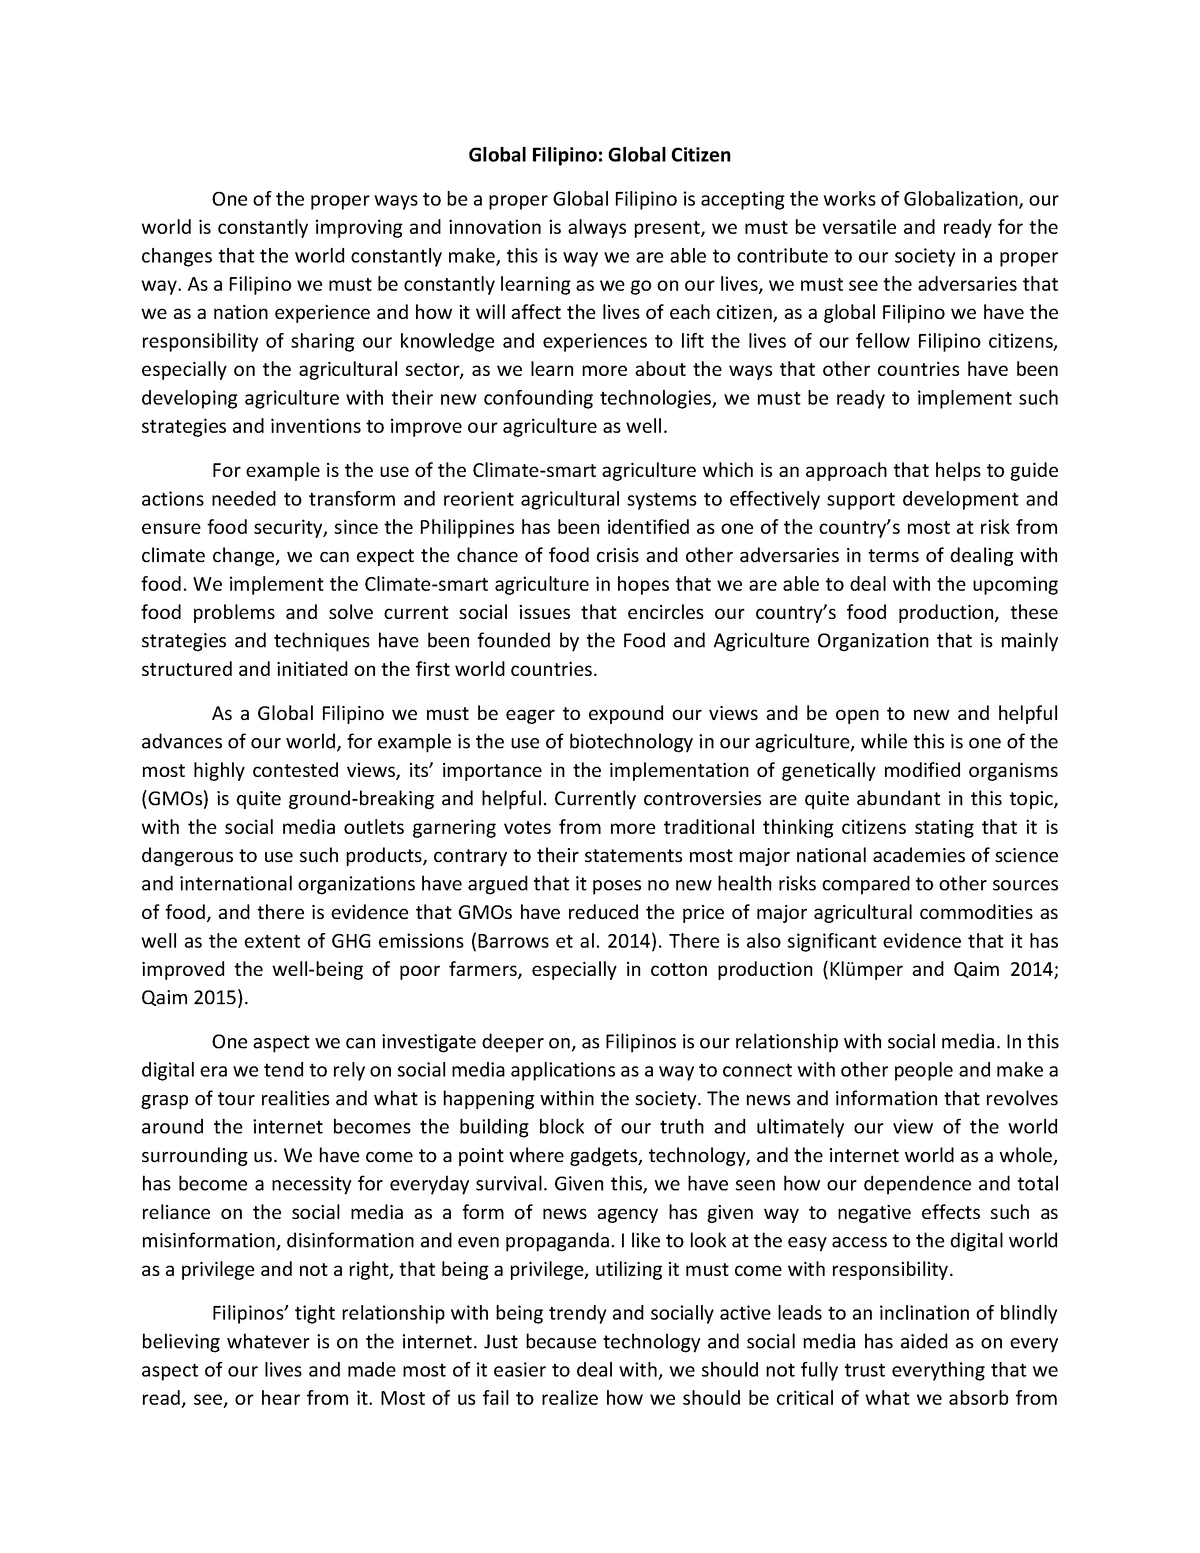 essay about the importance of active citizenship in philippine society